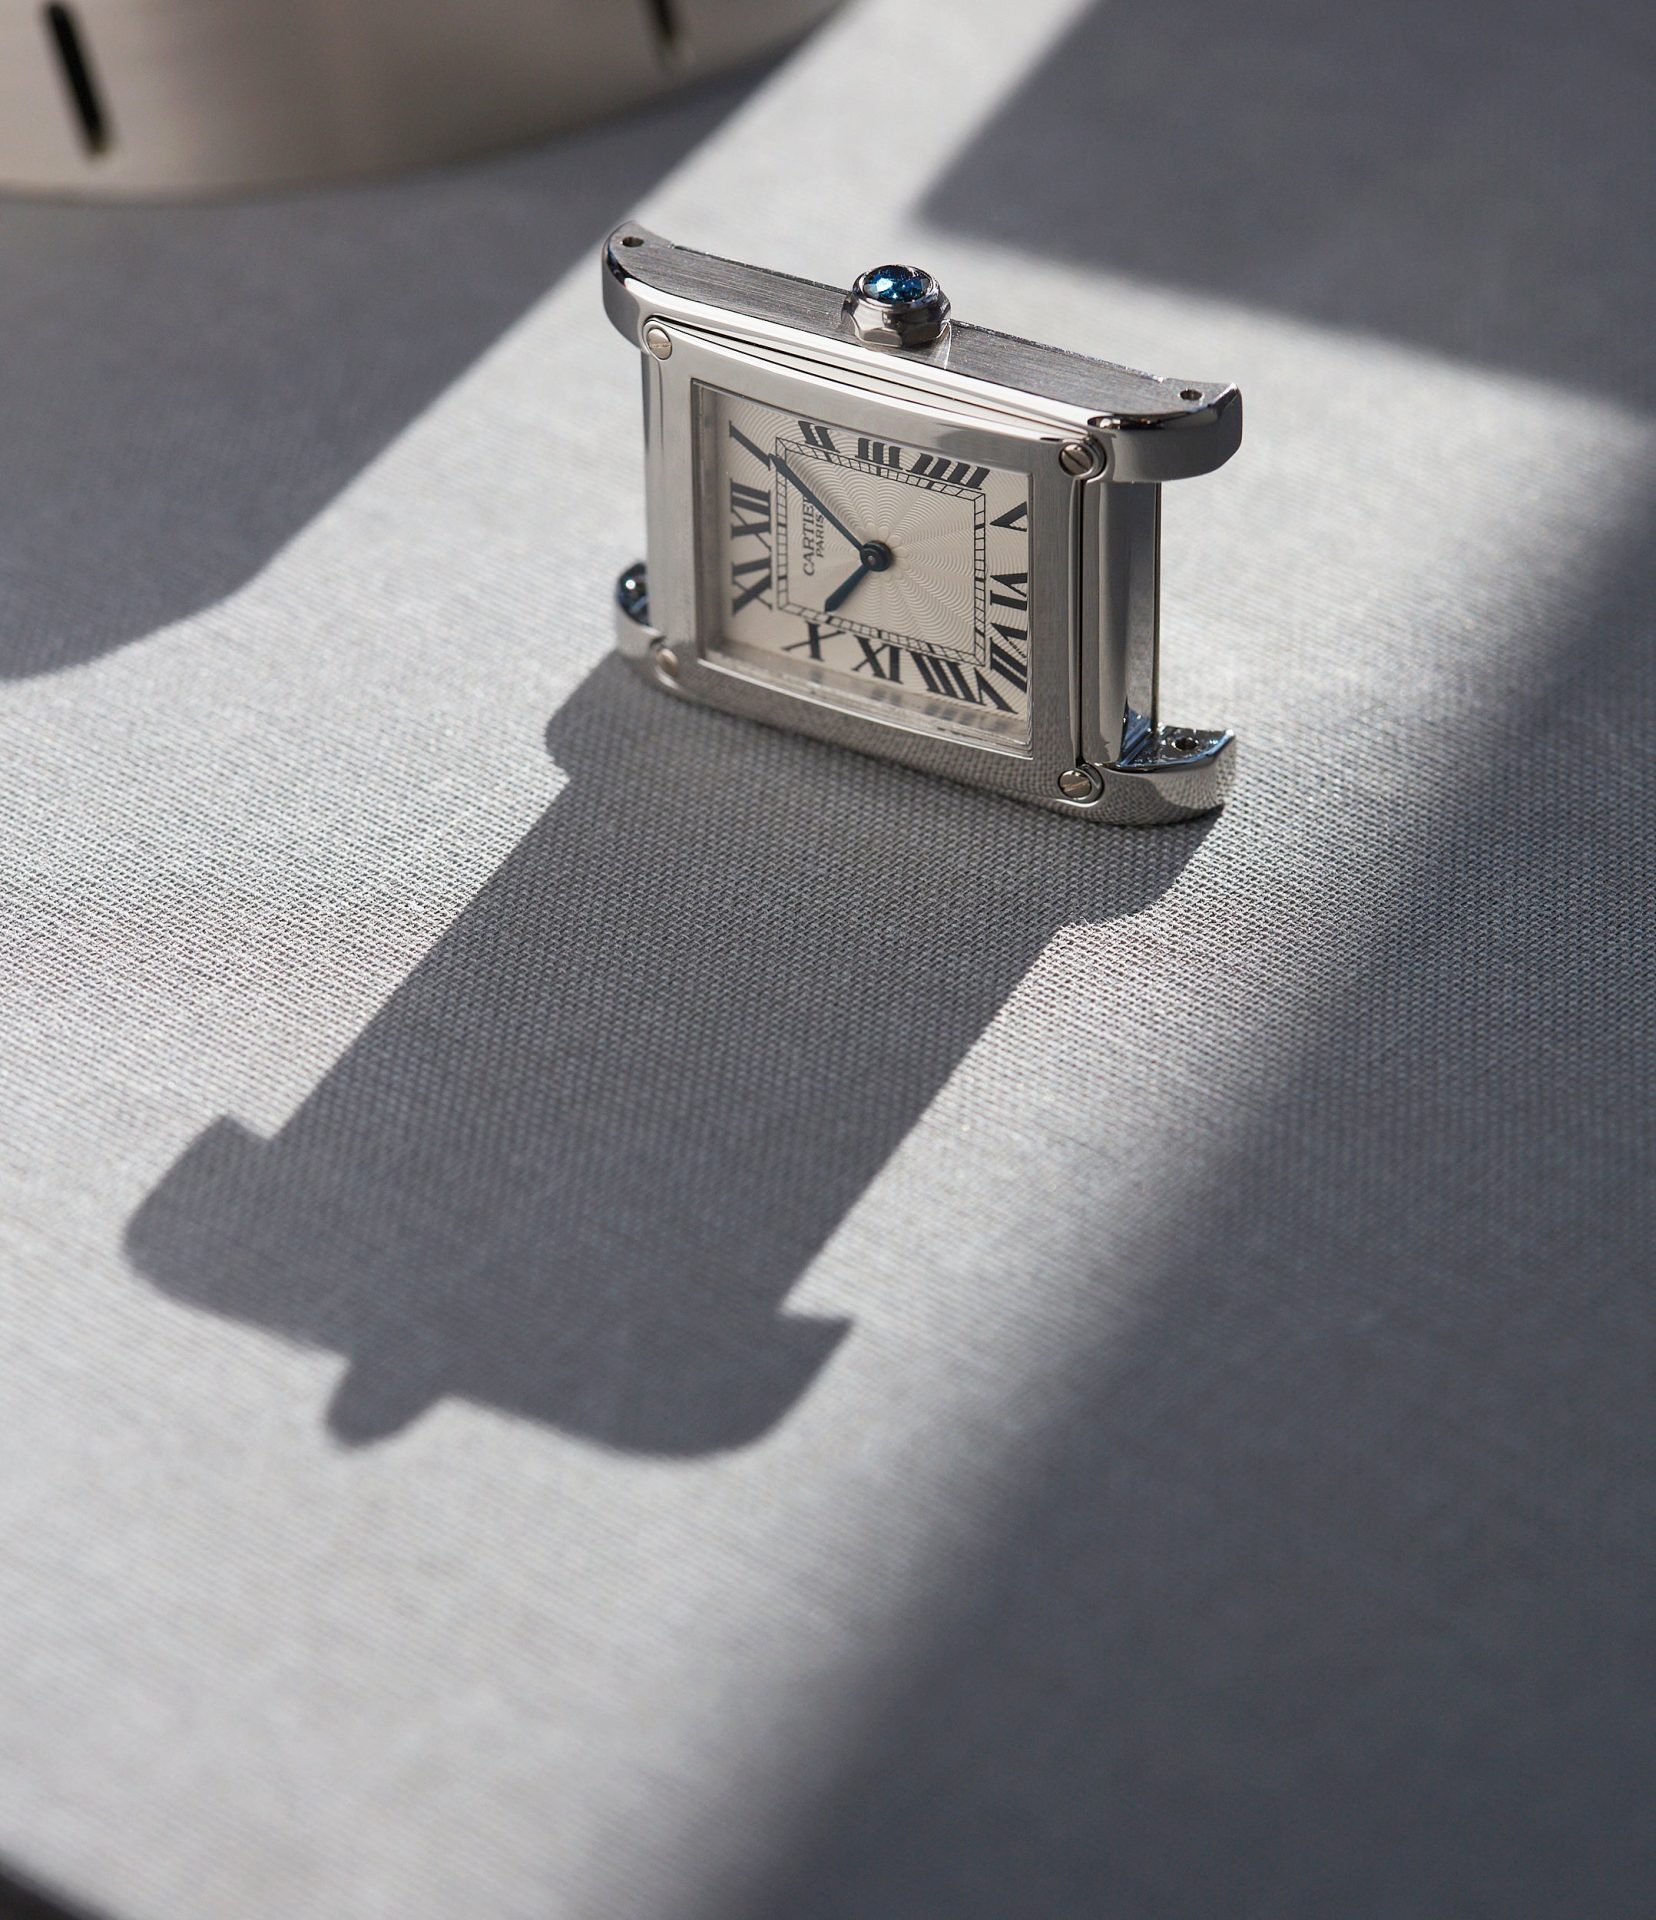 Cartier CPCP Tank à Vis watch on table with long shadow In A Collector’s Guide to the “Collection Privée Cartier Paris” for A Collected Man London